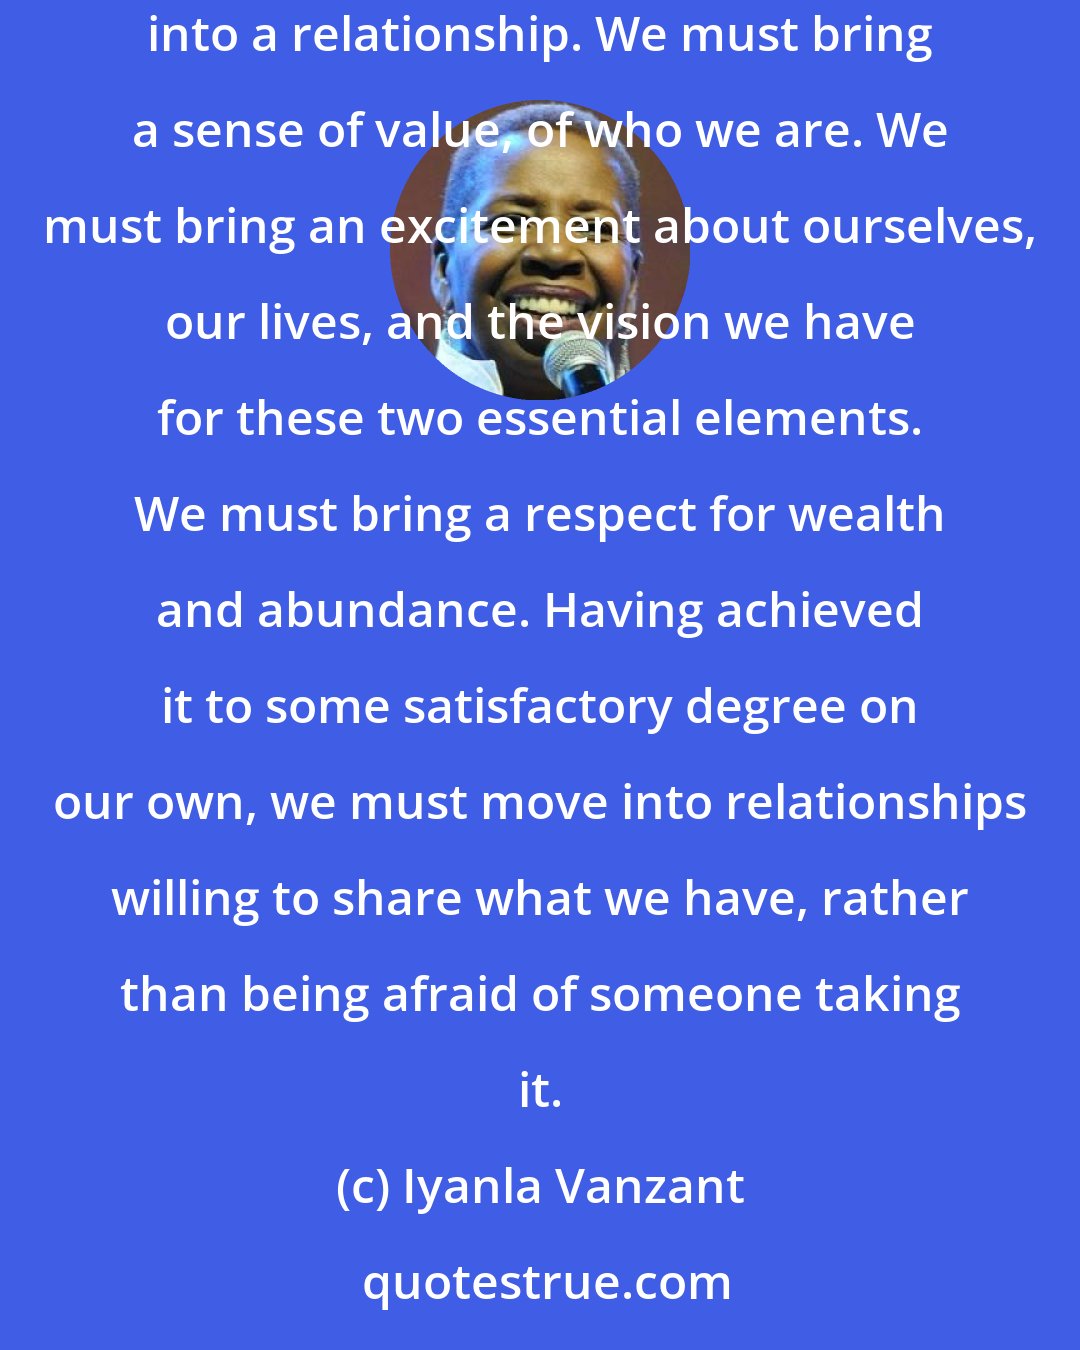 Iyanla Vanzant: We go into a relationship looking for love, not realizing that we must bring love with us. We must bring a strong sense of self and purpose into a relationship. We must bring a sense of value, of who we are. We must bring an excitement about ourselves, our lives, and the vision we have for these two essential elements. We must bring a respect for wealth and abundance. Having achieved it to some satisfactory degree on our own, we must move into relationships willing to share what we have, rather than being afraid of someone taking it.